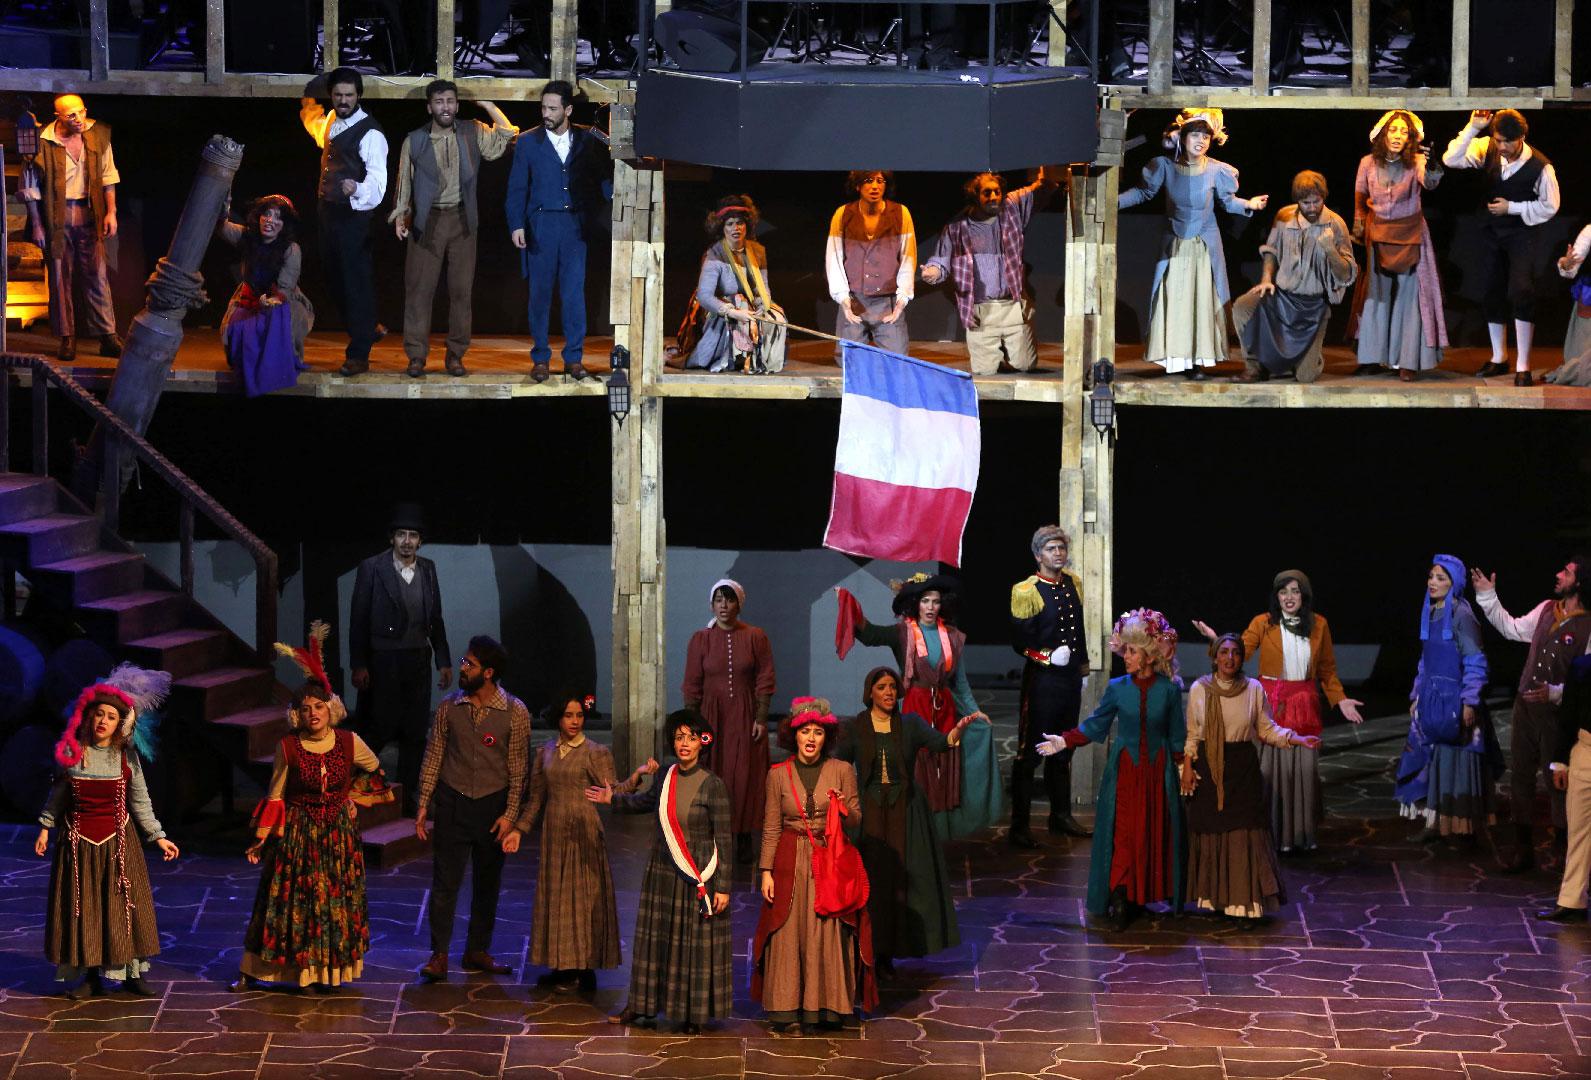 A scene from the musical production Les Miserables, performed by Iranian artists at the Espinas Hotel in the capital Tehran on December 3, 2018.